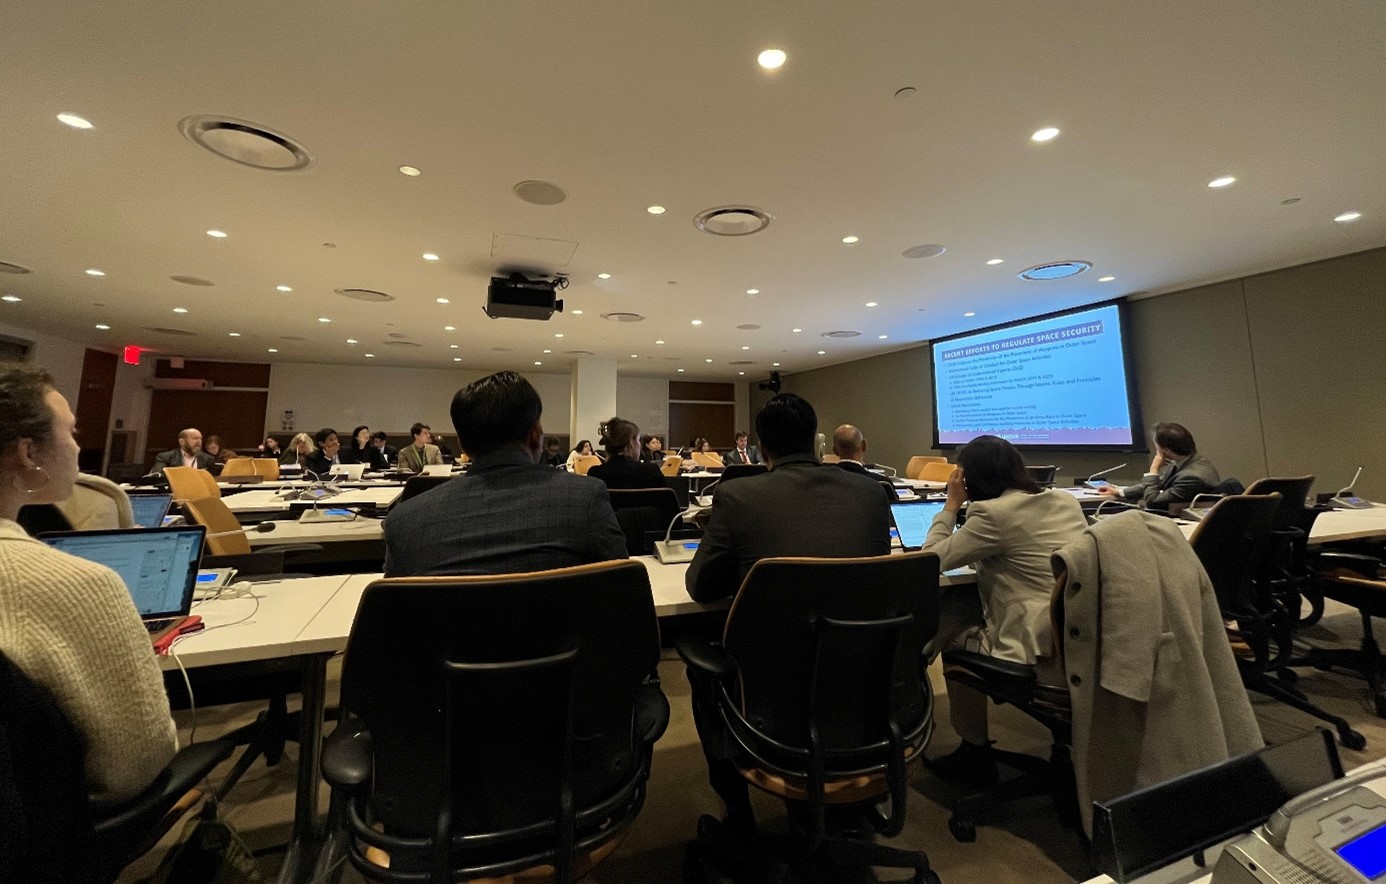 Ms. Almudena Azcarate Ortega, United Nations Institute for Disarmament Research, presentation on recent efforts to regulate outer space. 24 March 2023